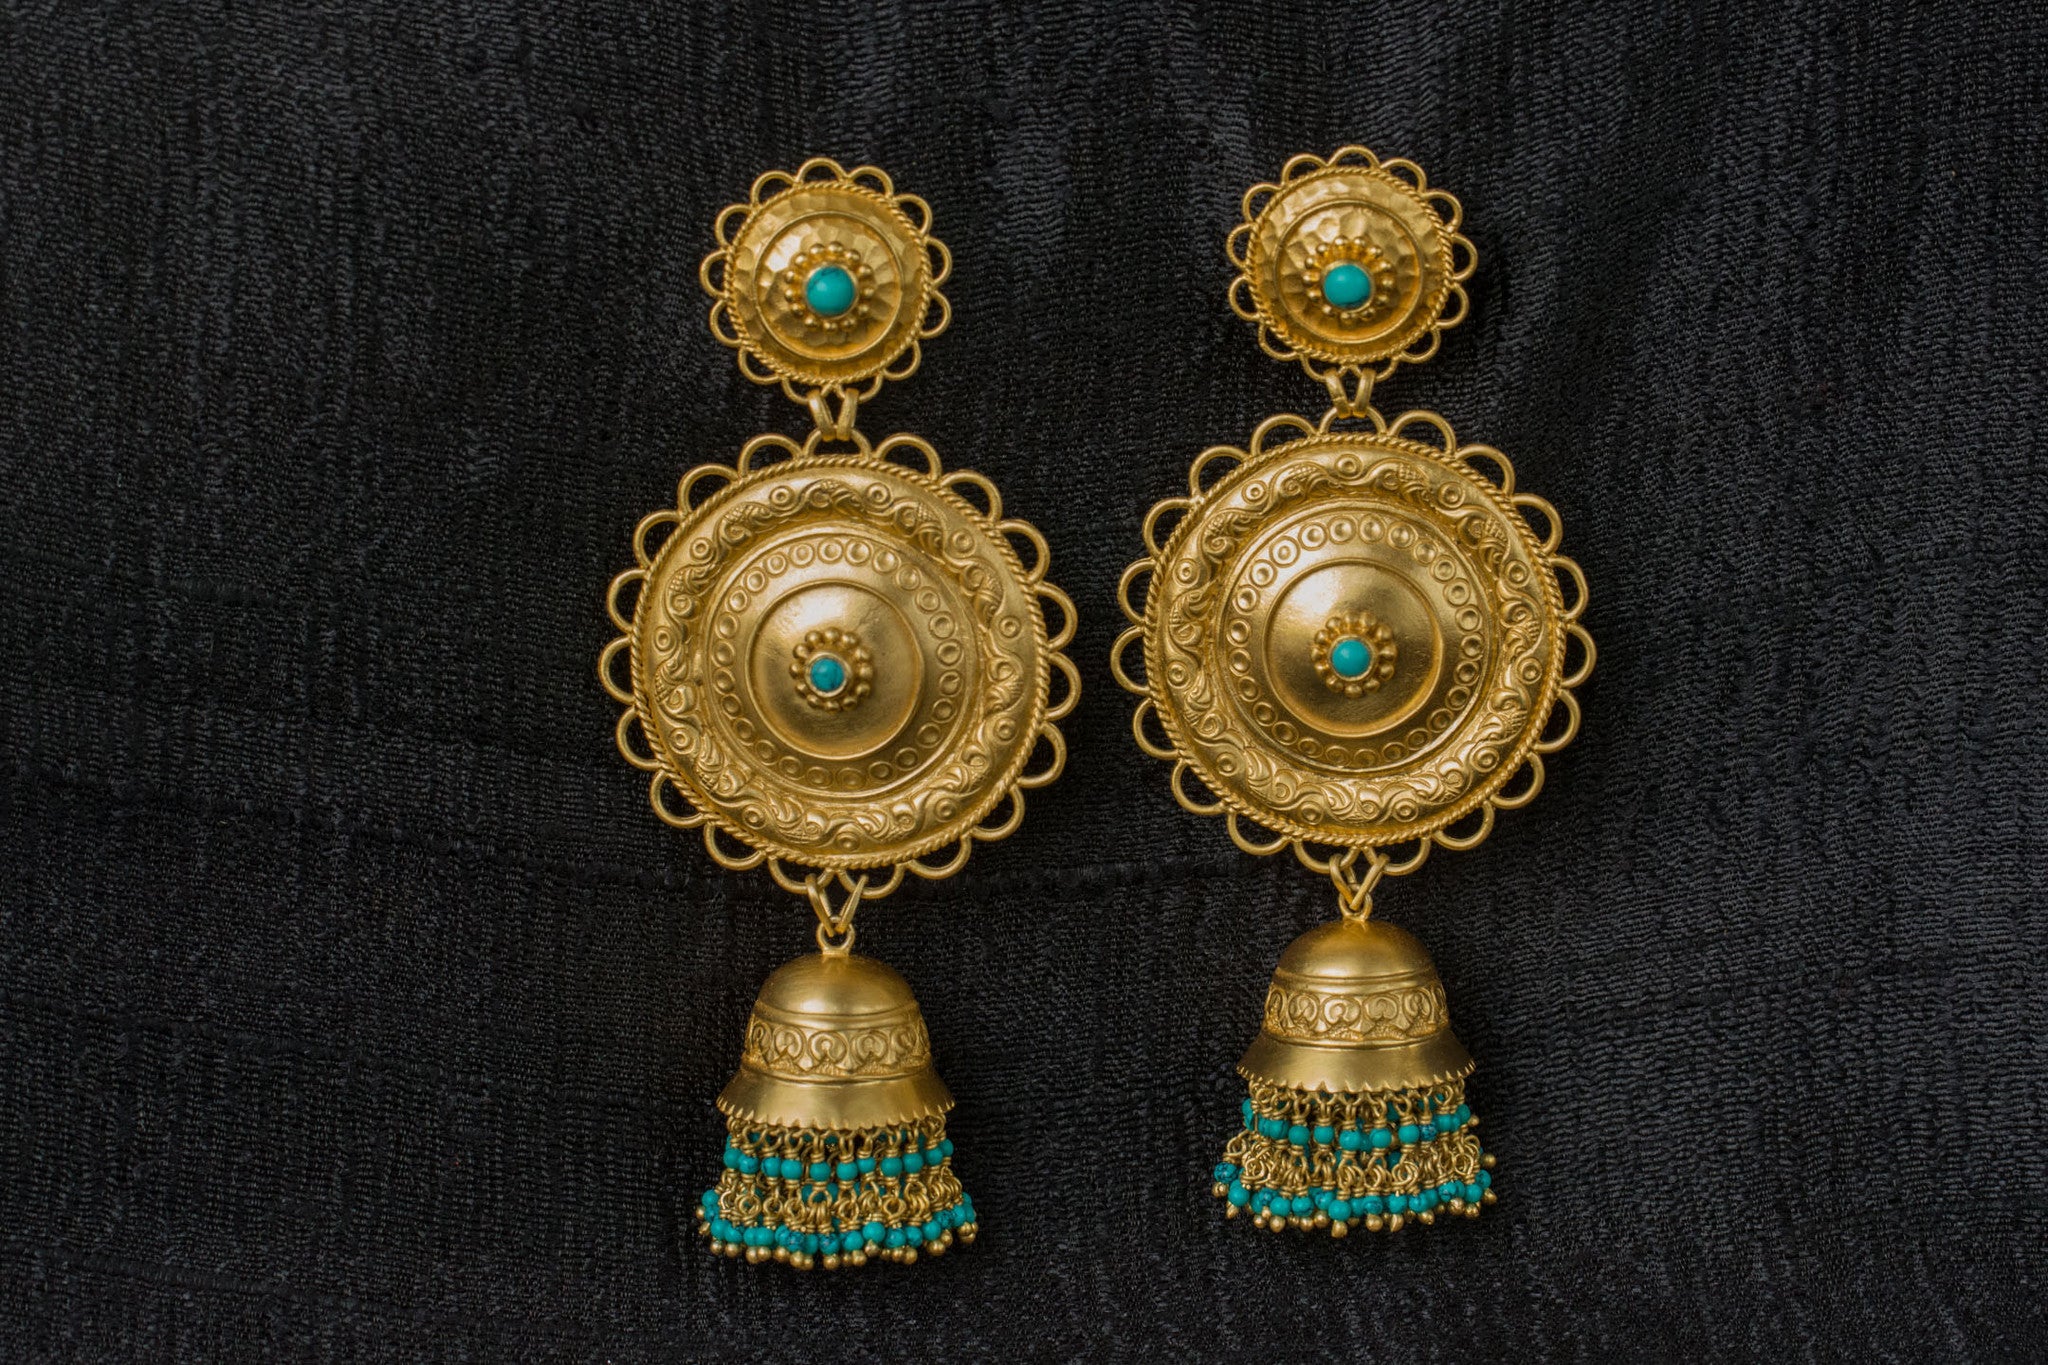 20a529-silver-gold-plated-amrapali-earrings-raised-design-chandelier-turquoise